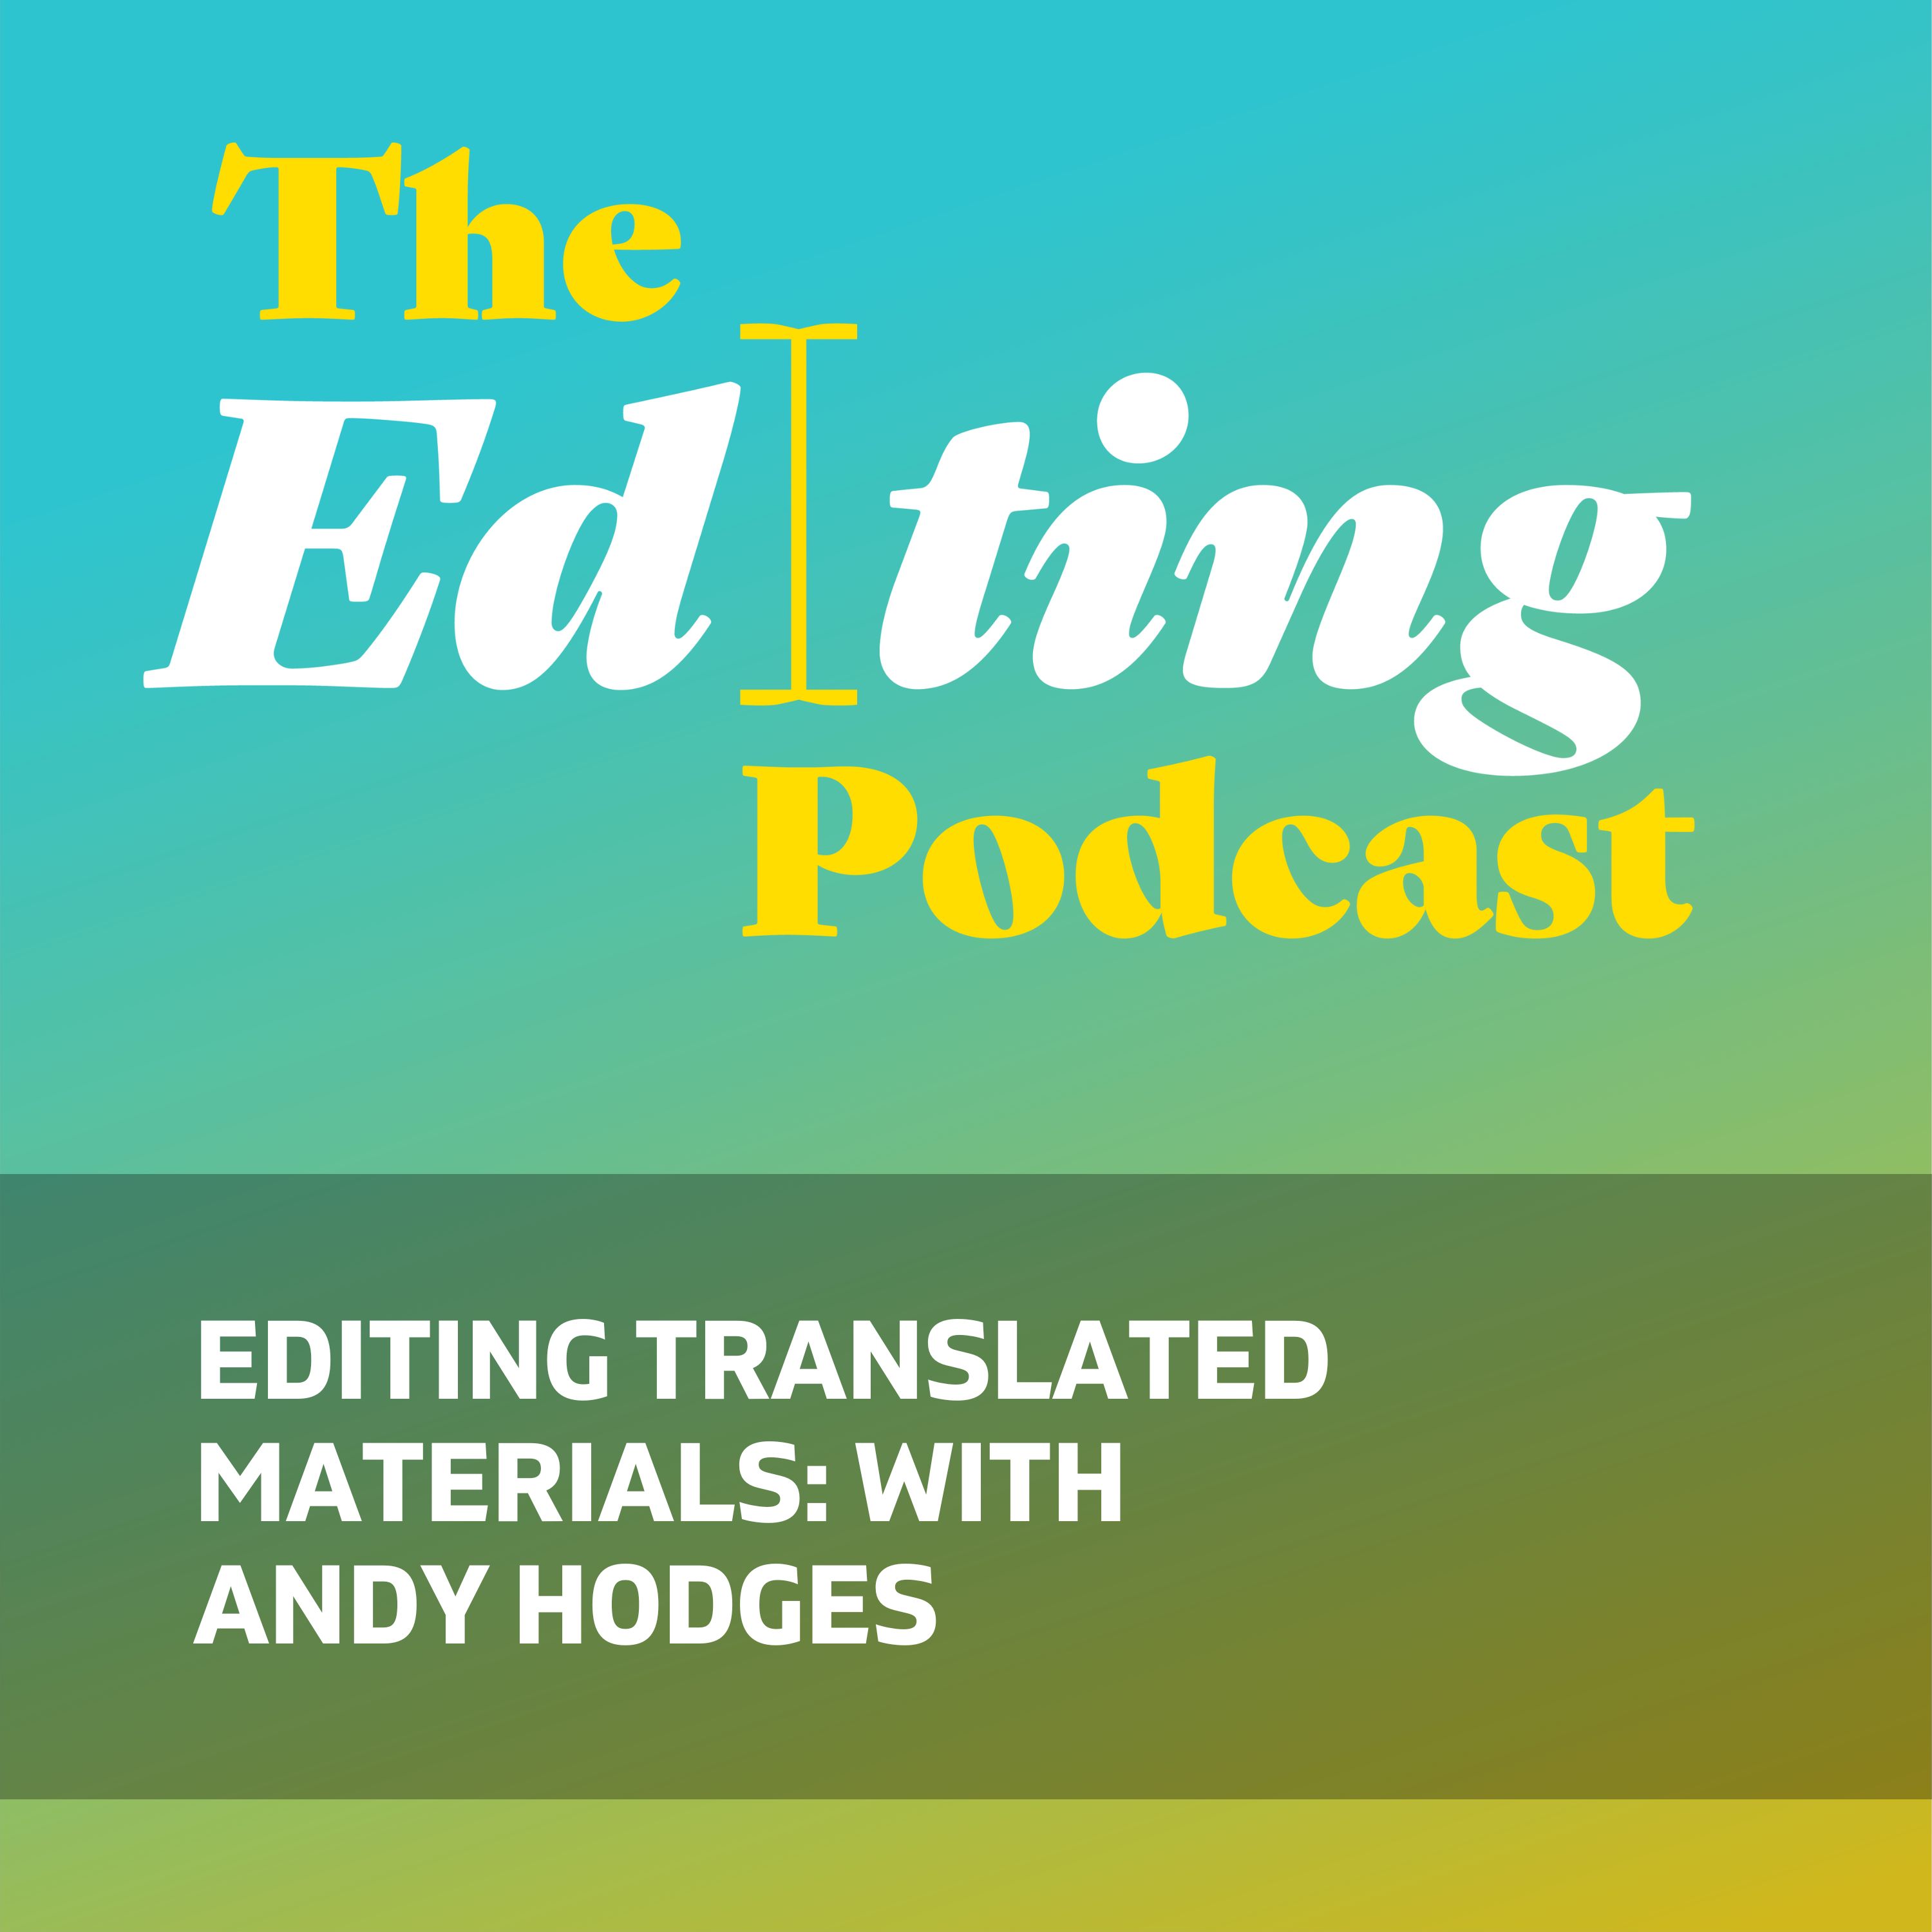 Editing translated materials: With Andy Hodges